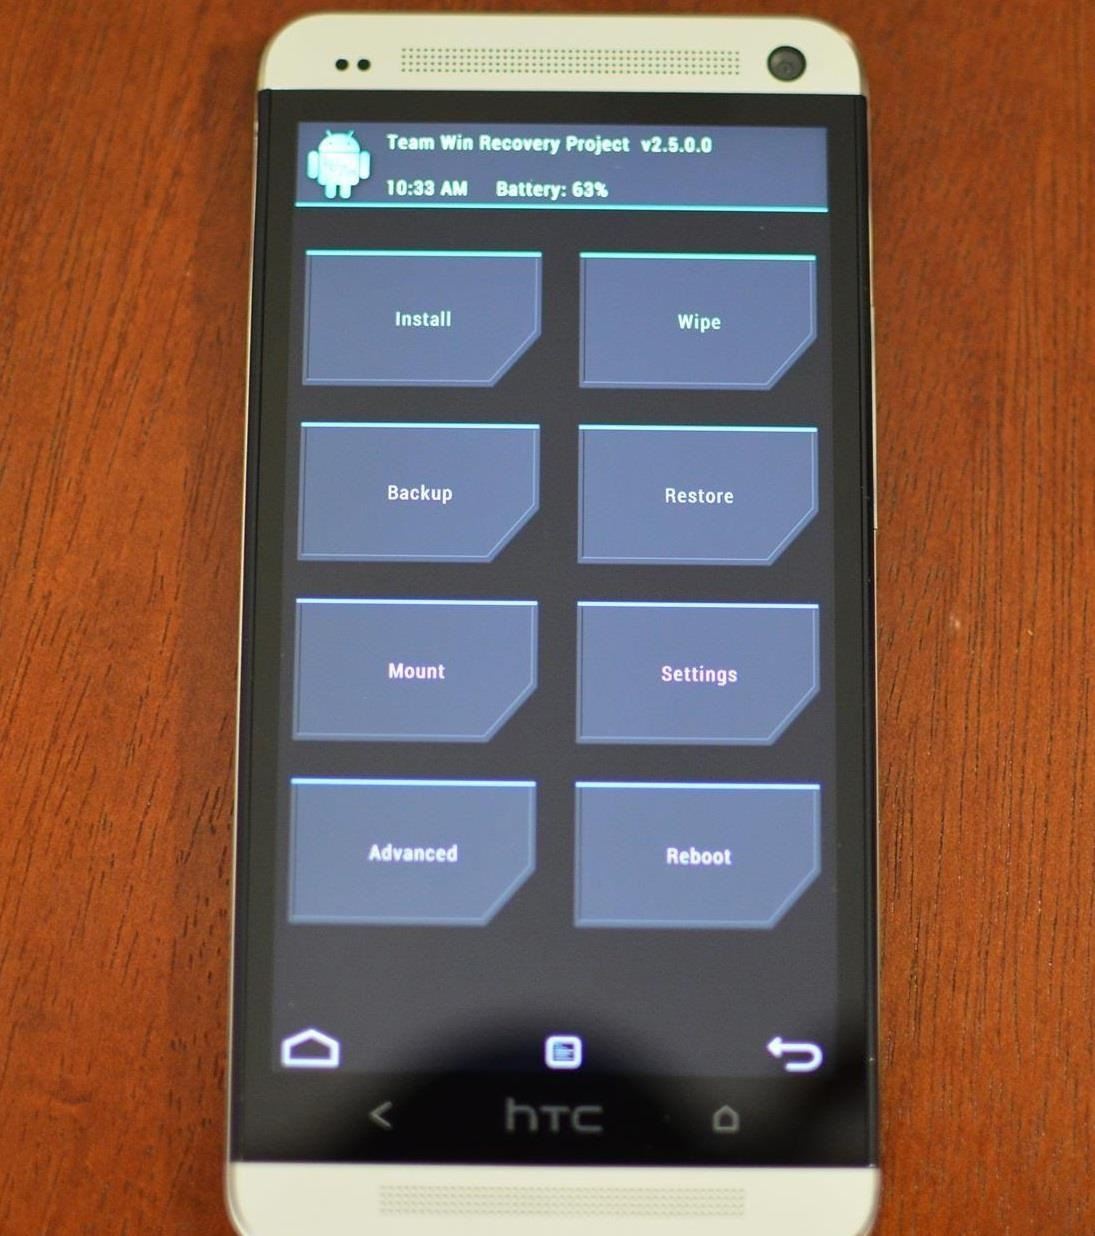 How to Turn Your HTC One into a Real HTC One Google Play Edition